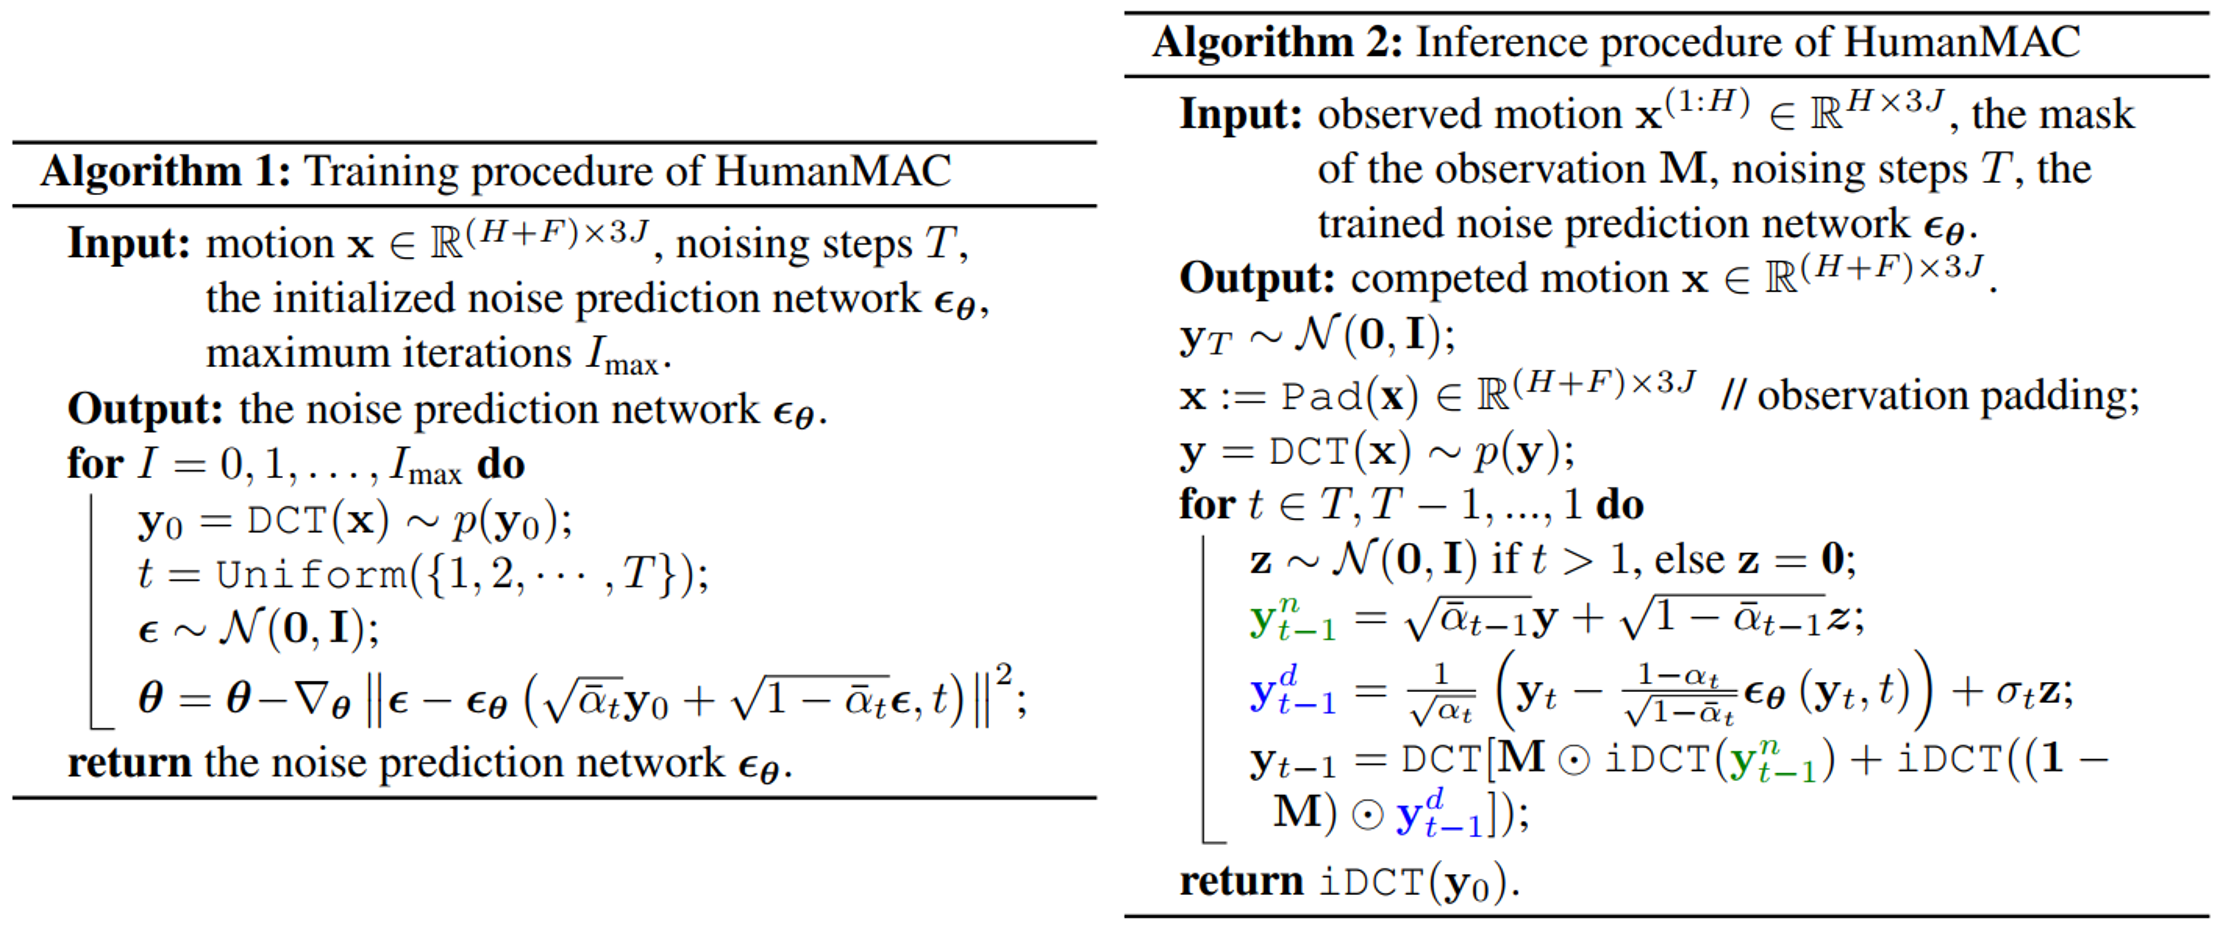 HumanMAC train and inference algorithm